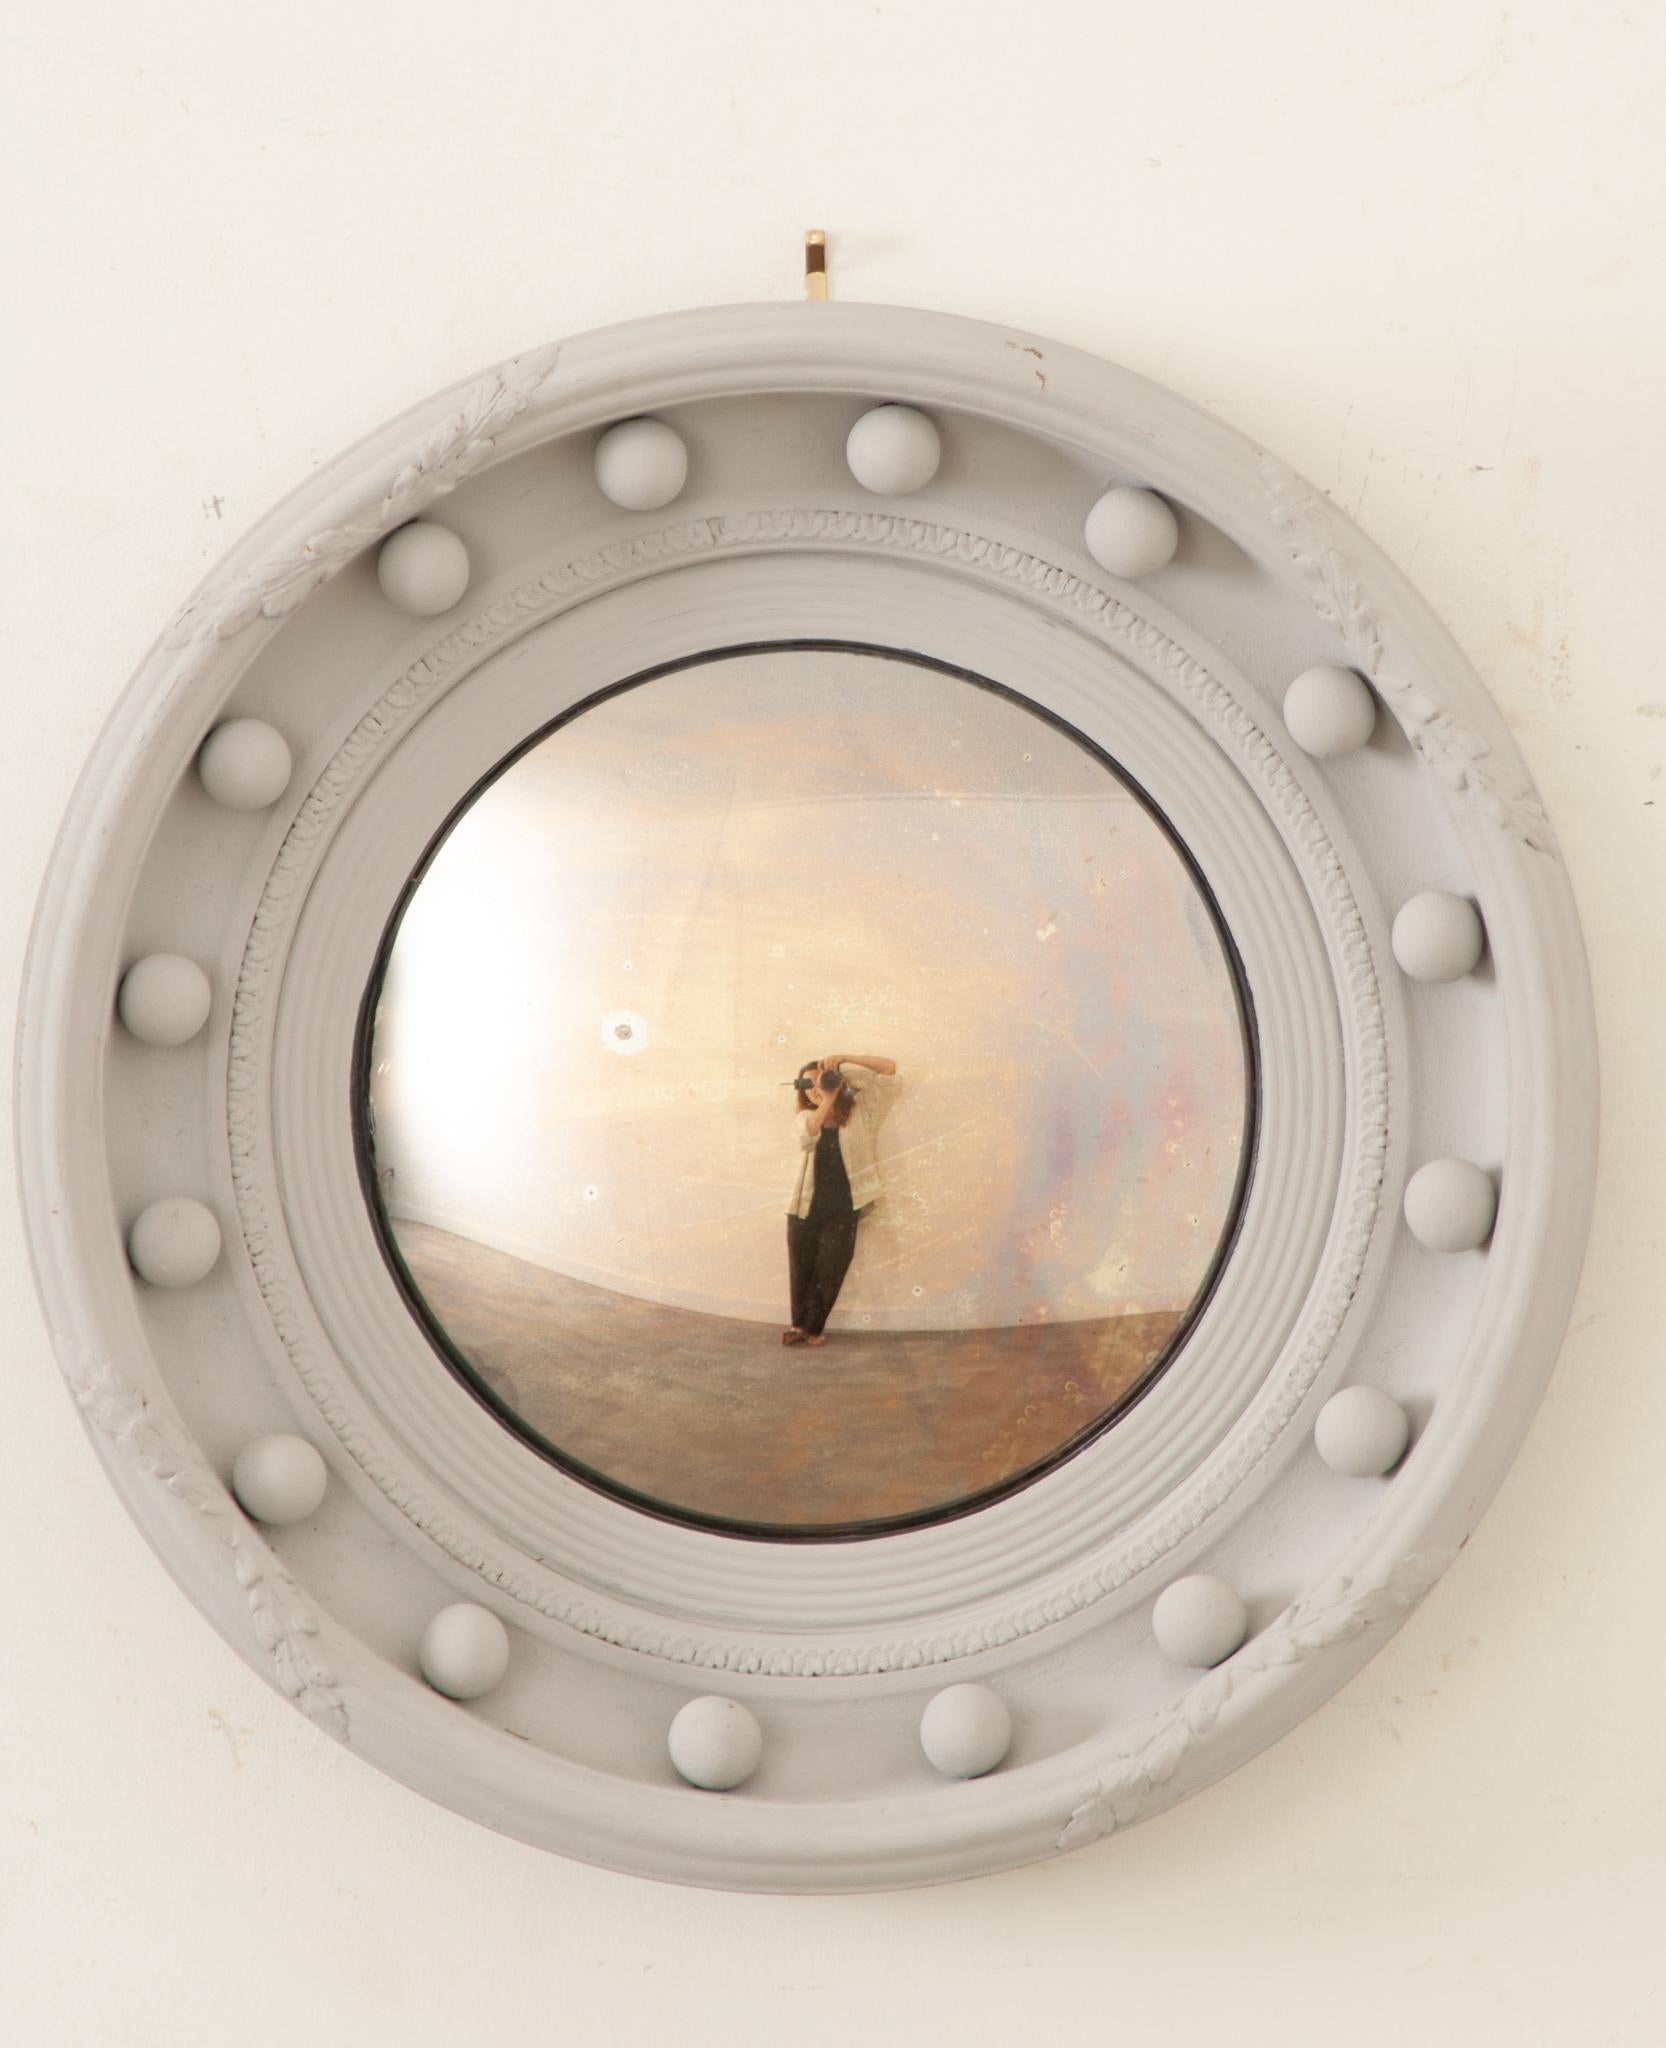 An English 19th century convex bullseye mirror with petite spheres and painted finish. This stylish circular mirror features the original convex mirror plate, with the gorgeous signs of age and foxing, reflecting and distorting images beautifully,